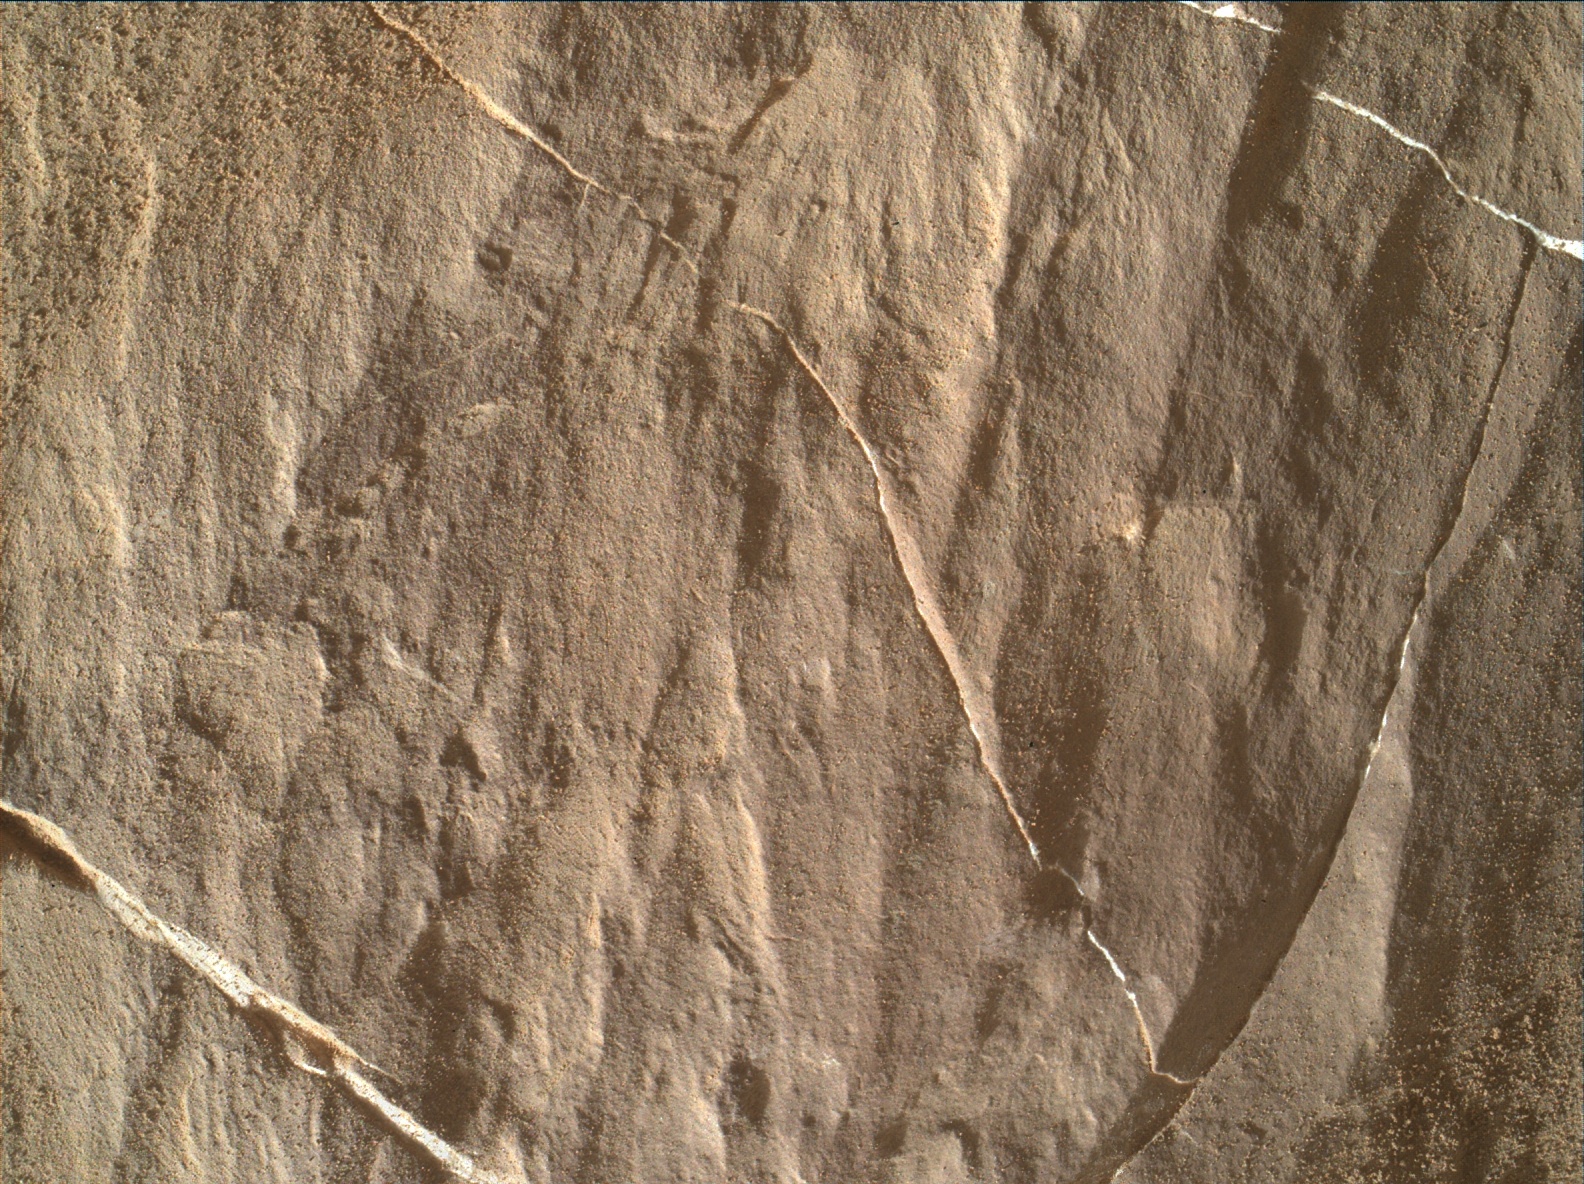 Nasa's Mars rover Curiosity acquired this image using its Mars Hand Lens Imager (MAHLI) on Sol 1837